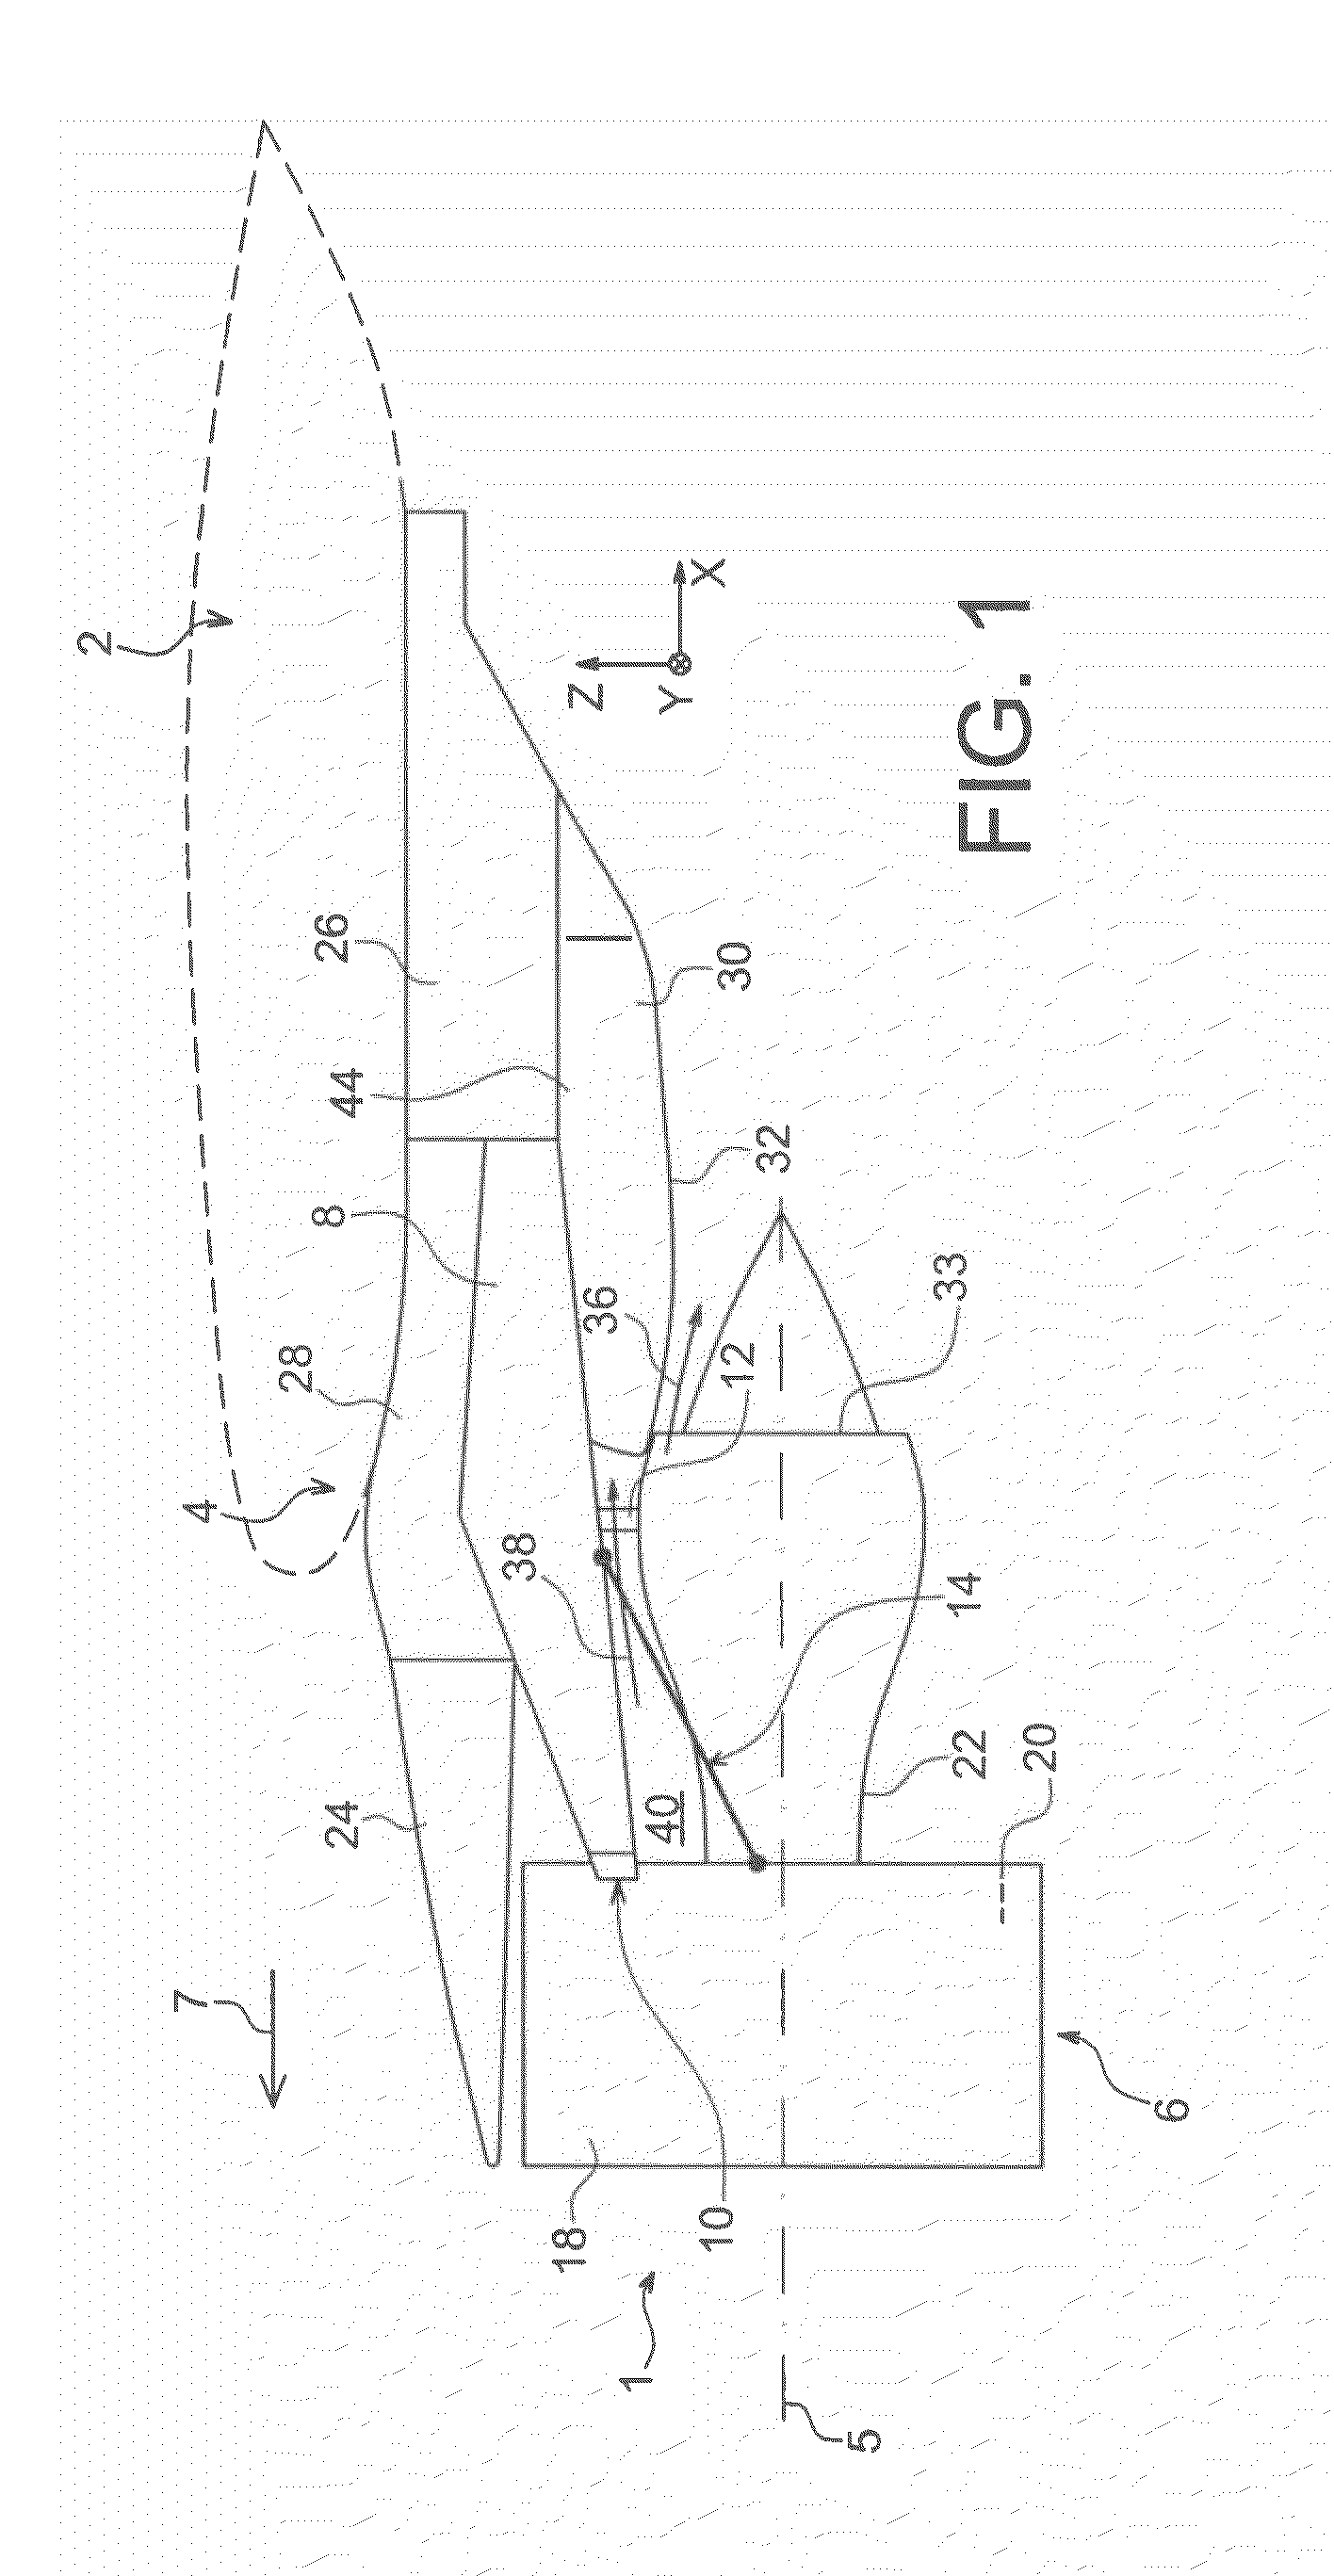 Method of manufacture by superplastic forming and by fishplating of a rib for an aerodynamic fairing of an aircraft engine mounting pylon